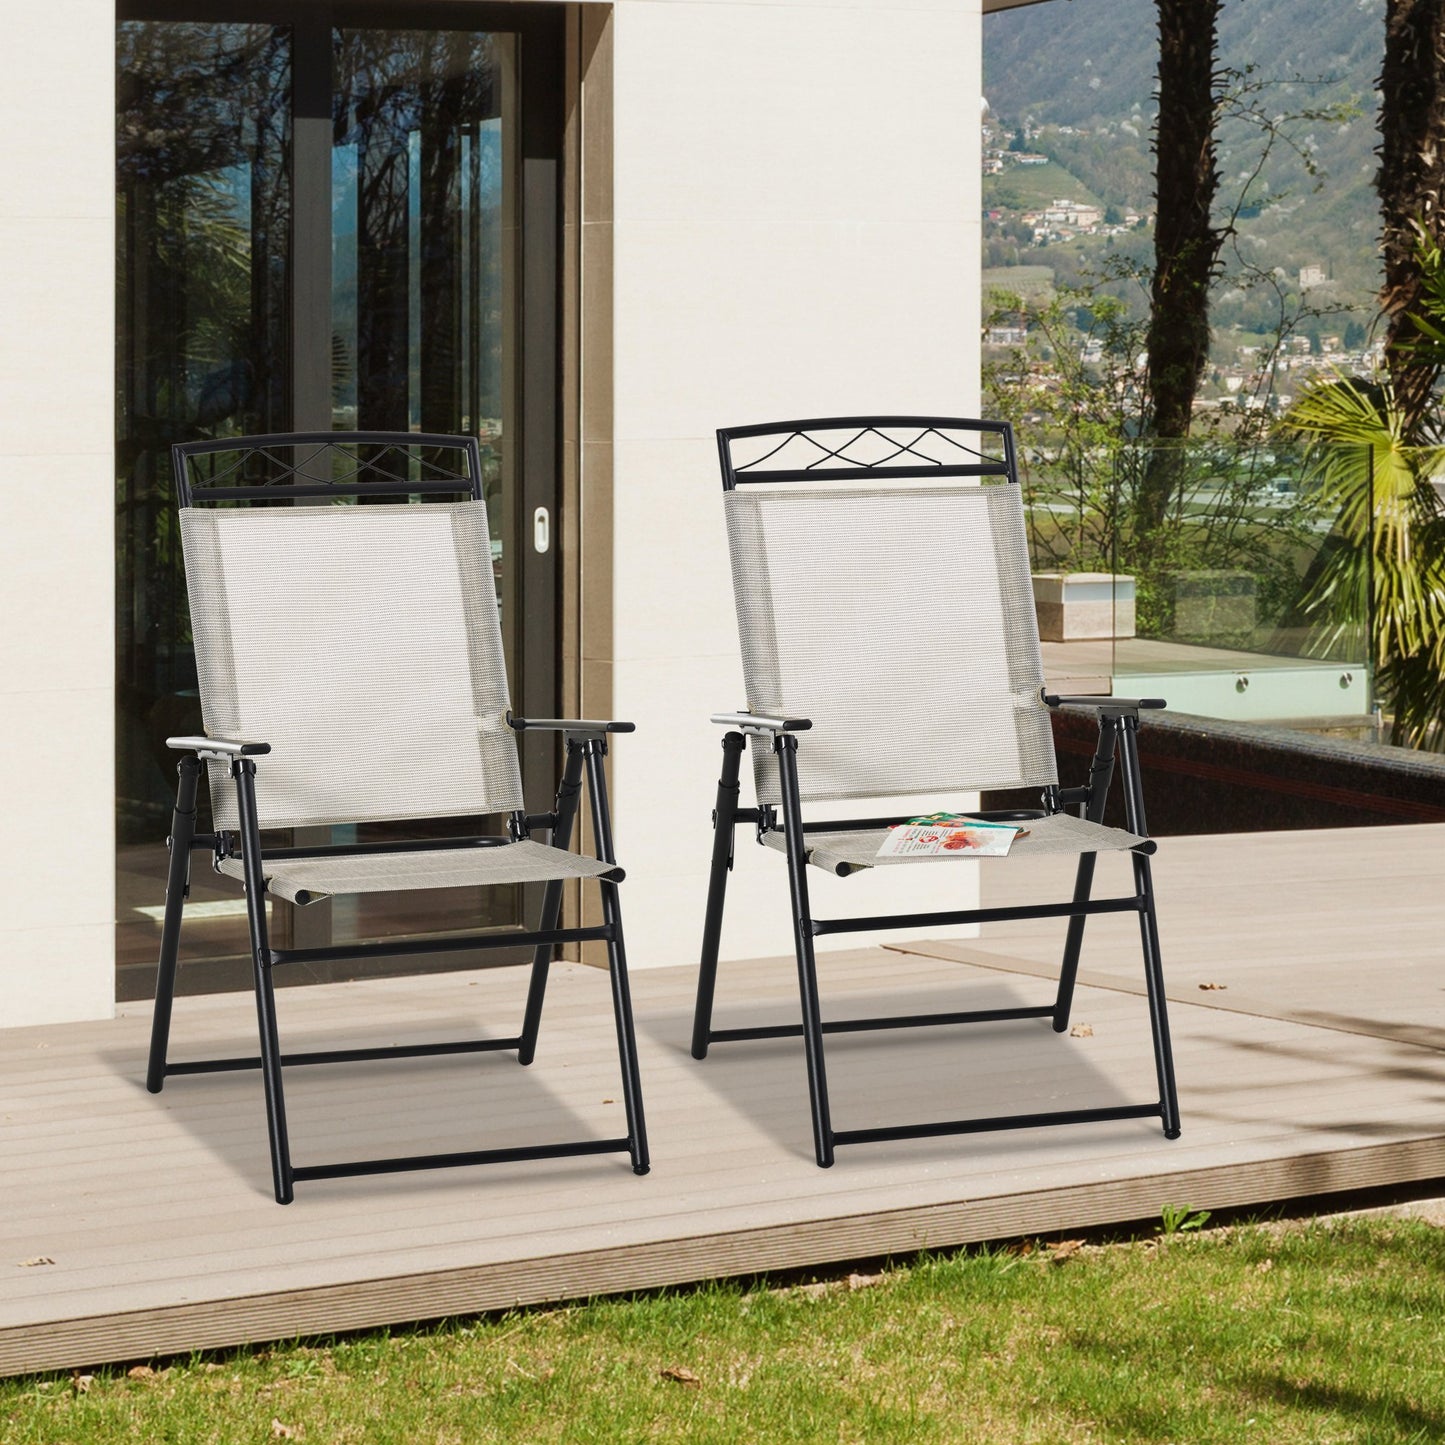 Outsunny Outdoor Chairs Set of 2 Foldable w/ Texteline Fabric for Garden Balcony Poolside